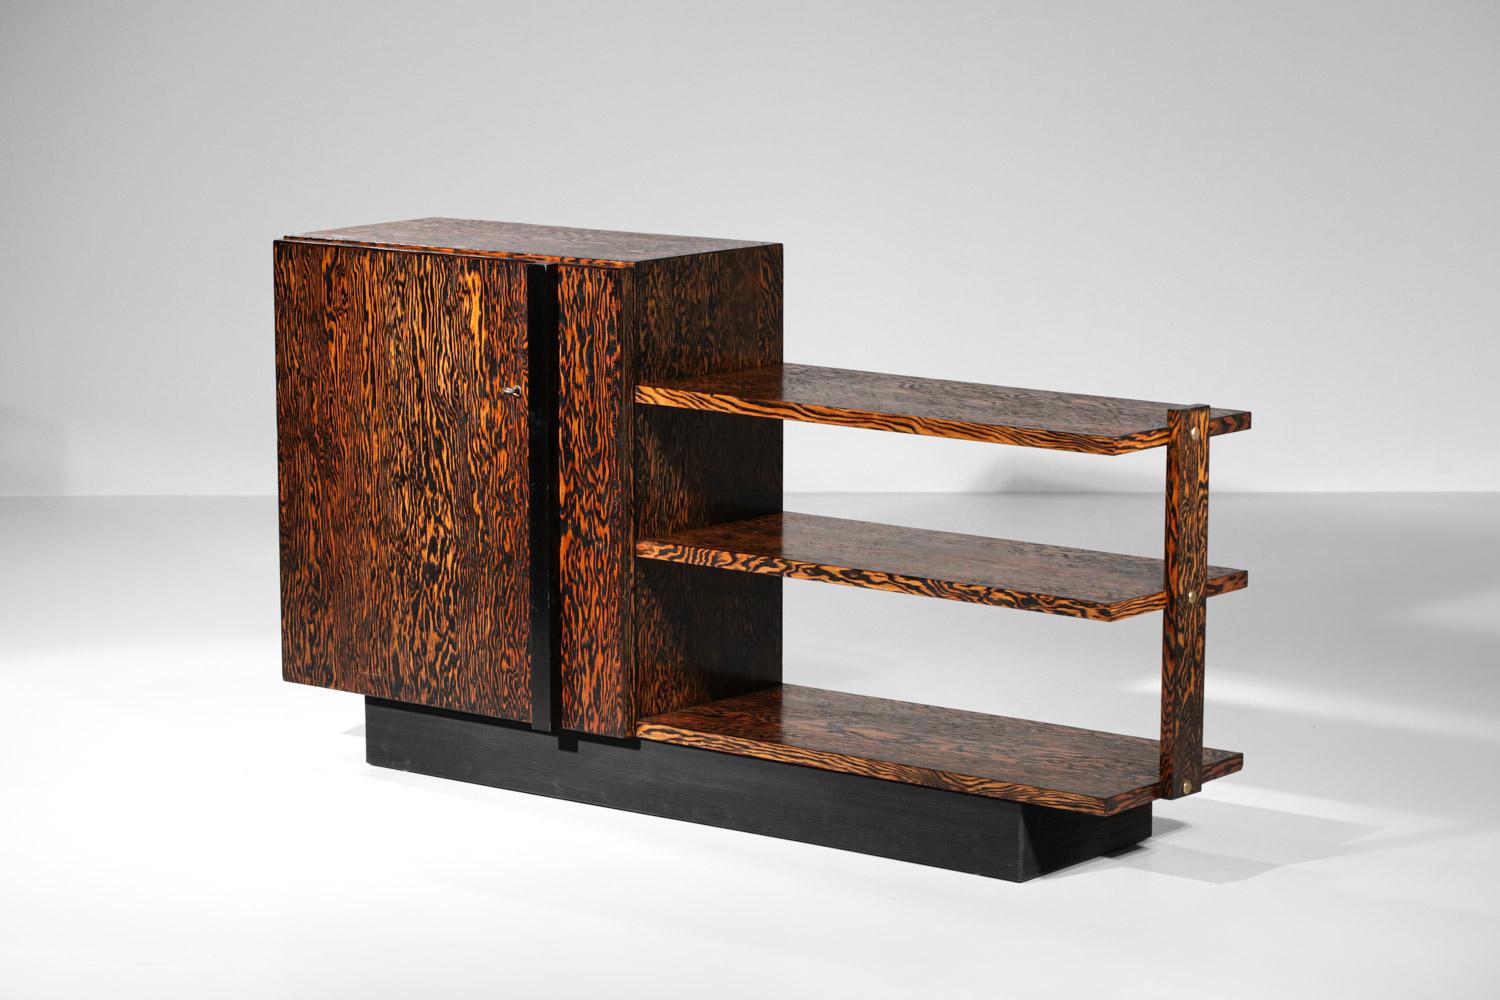 Sideboard of the Lyon designer André Sornay dating from the 40s. Structure in veneered and solid Oregon pine, stained on the bottom of the base in black. The sideboard is composed of a buffet part and a shelf part. Note the beautiful work of